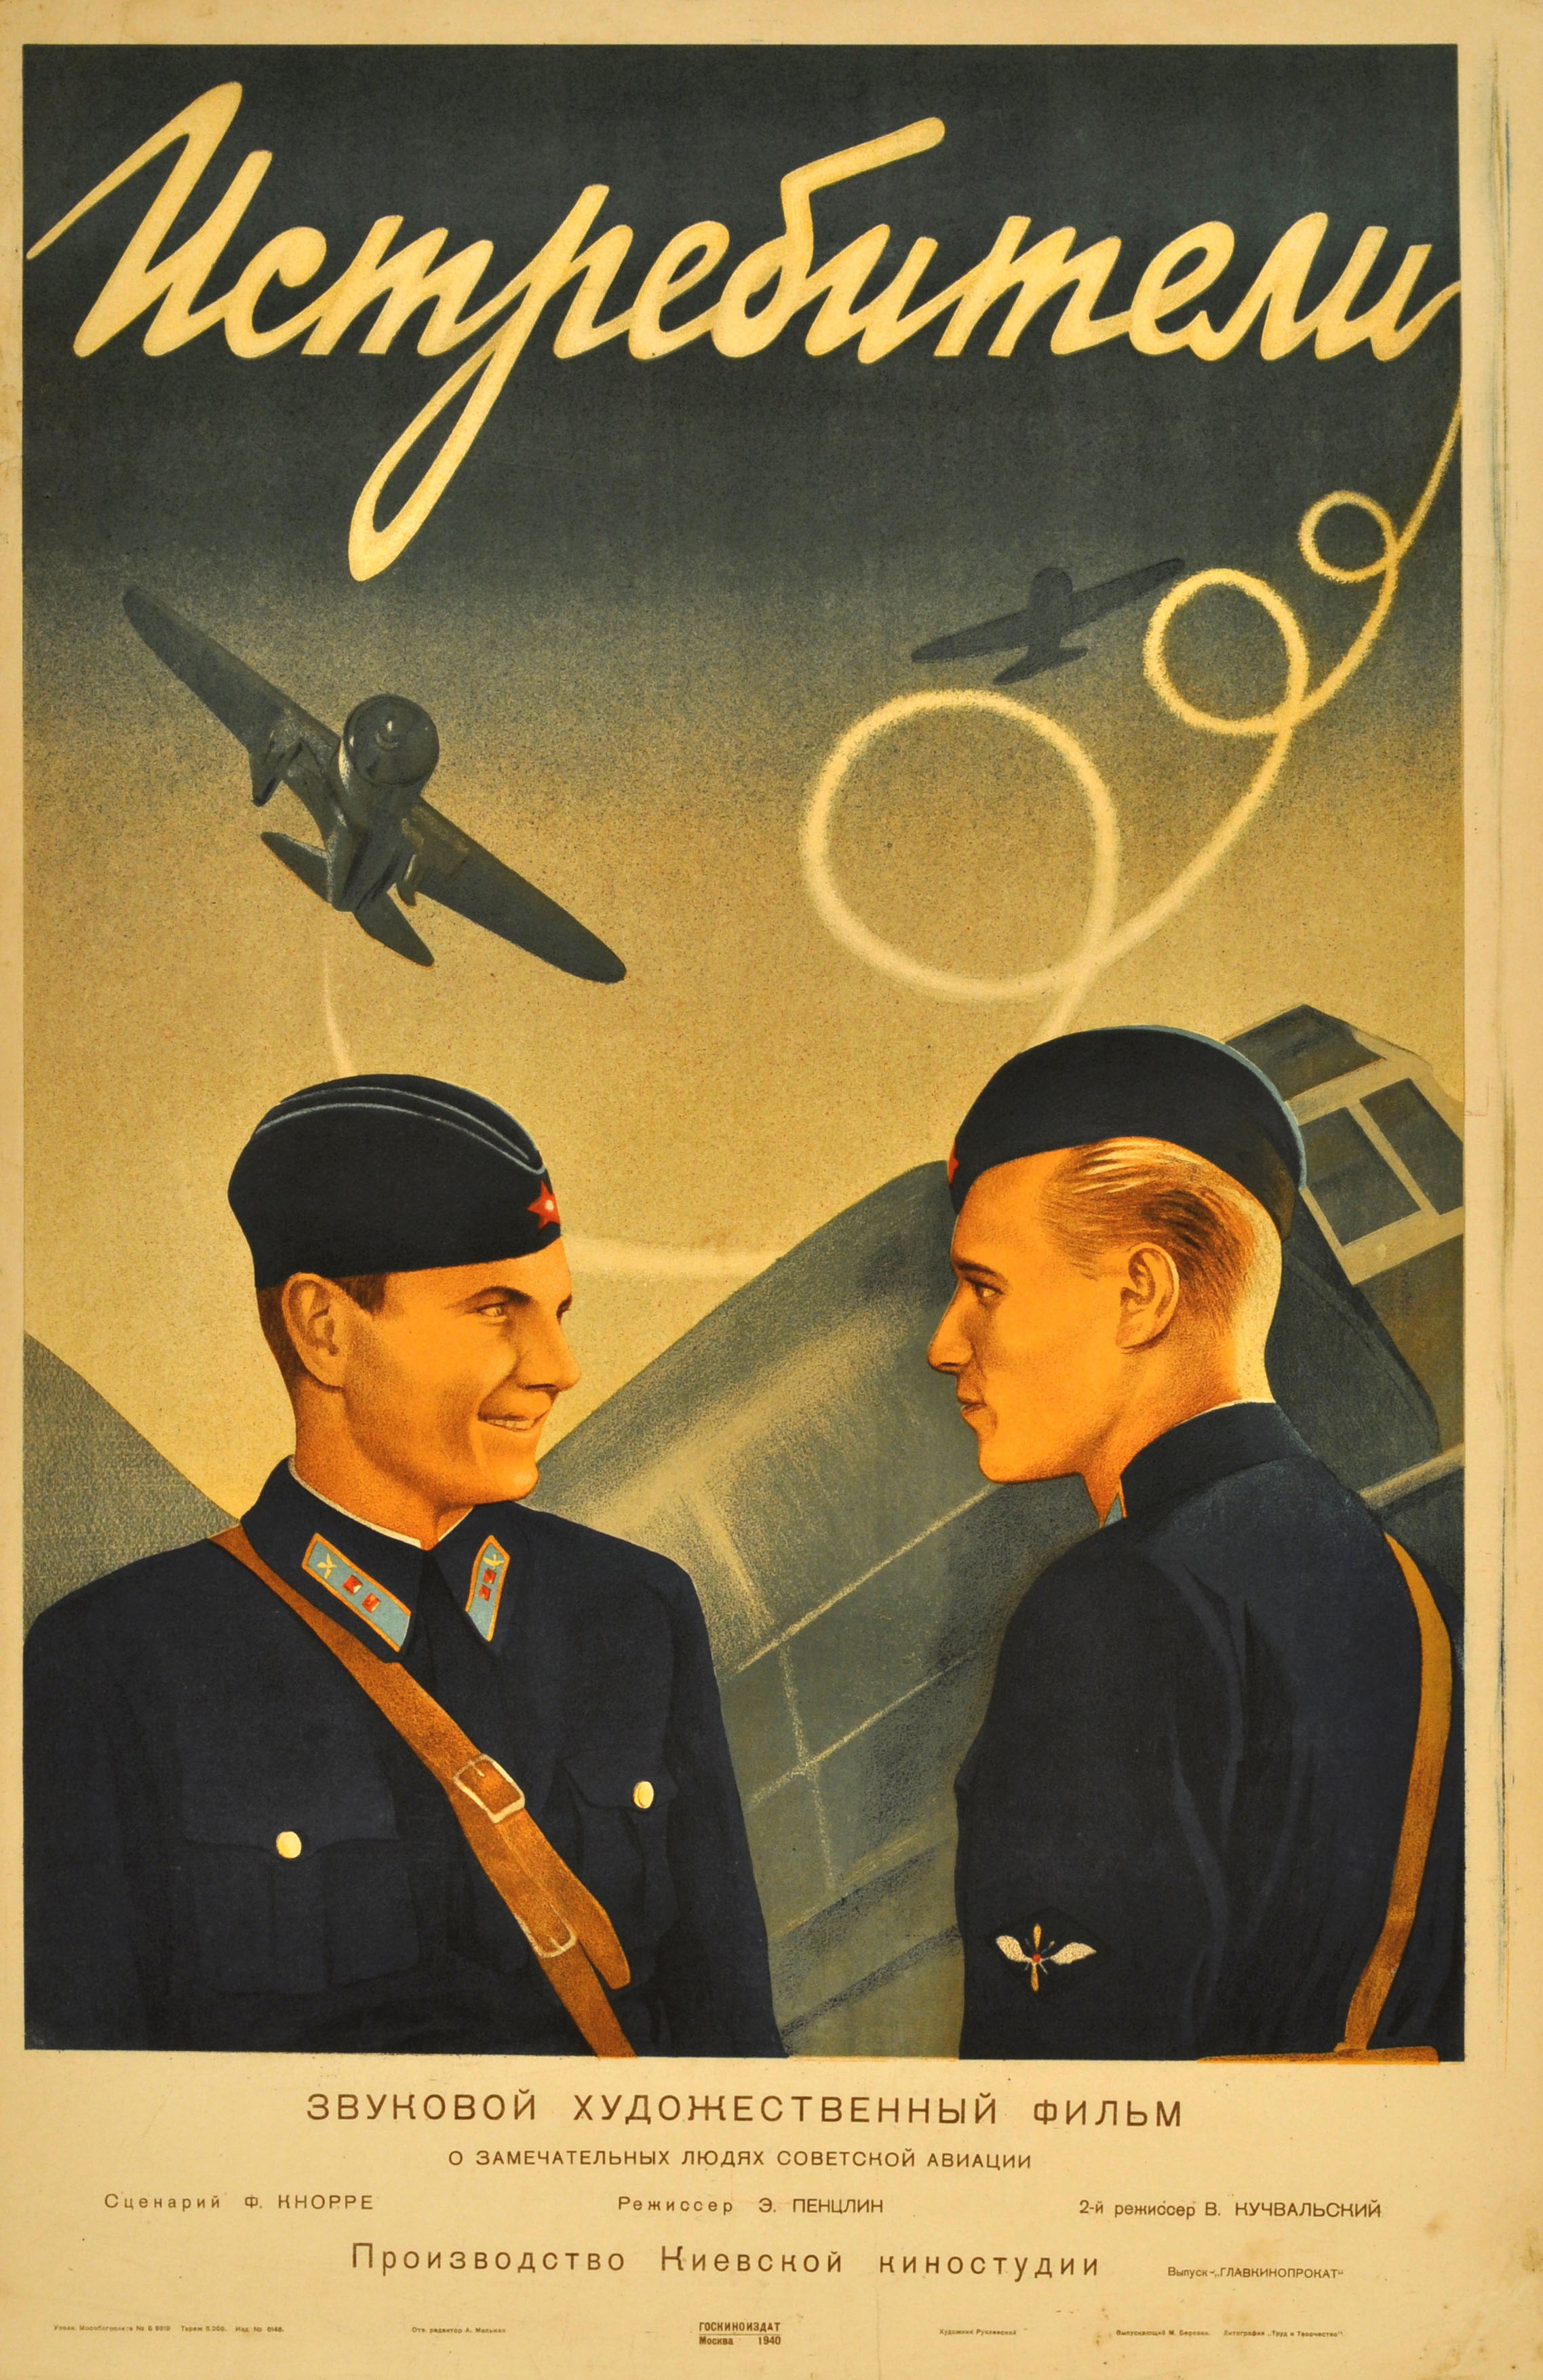 Original Rare Movie Poster for a Film about the Soviet Air Force Fighter Pilots